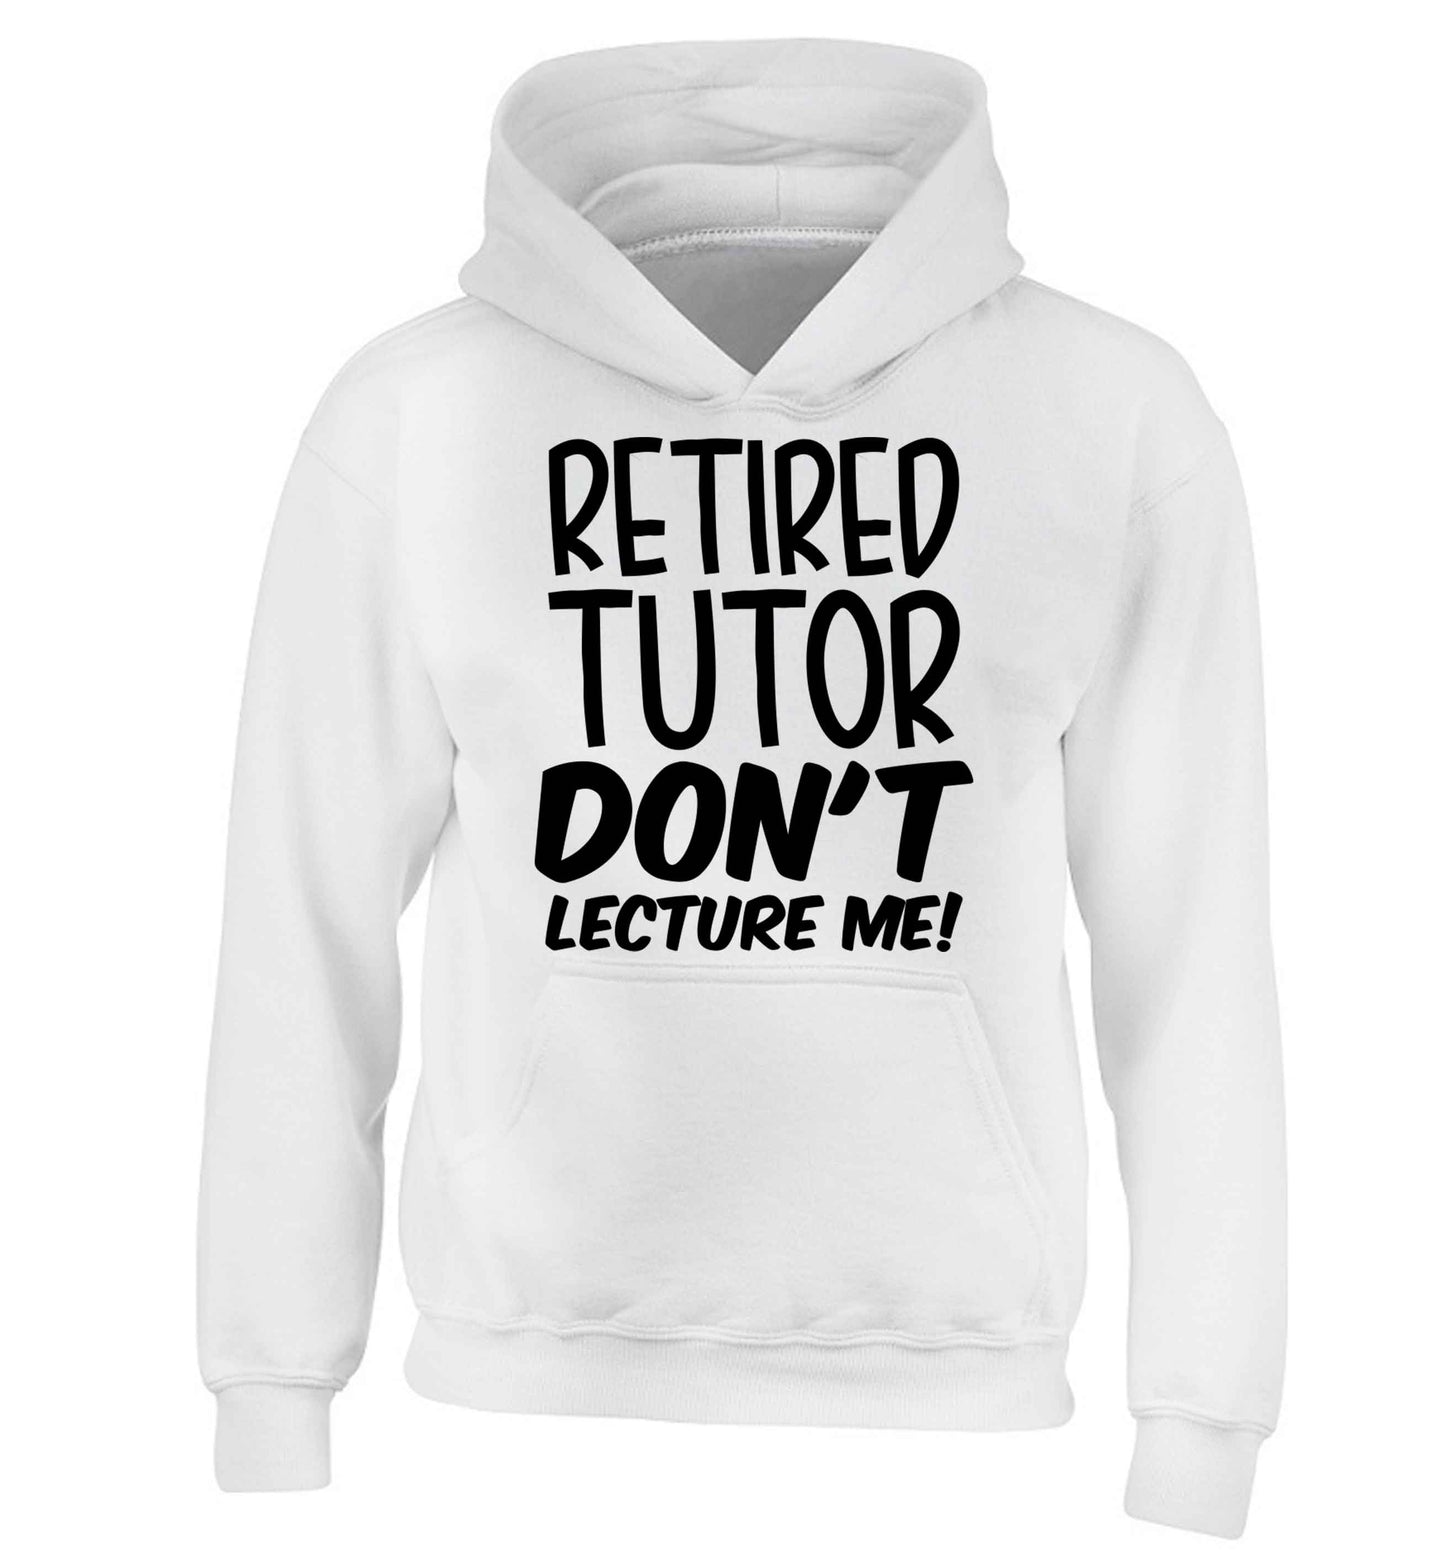 Retired tutor don't lecture me! children's white hoodie 12-13 Years